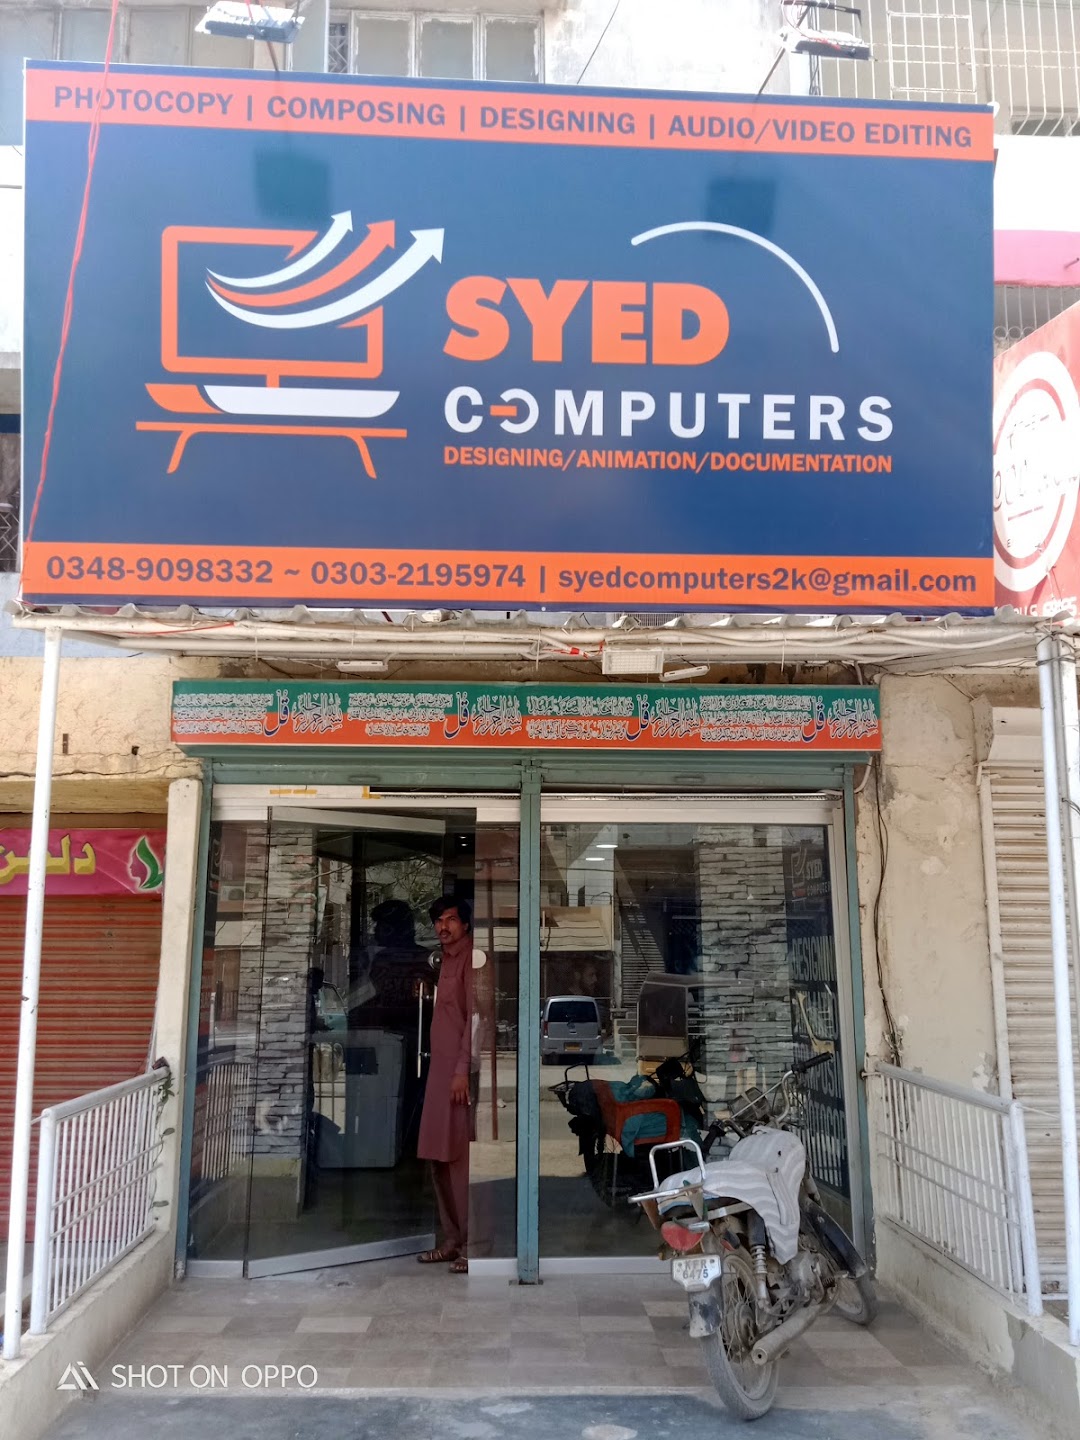 Syed Computers